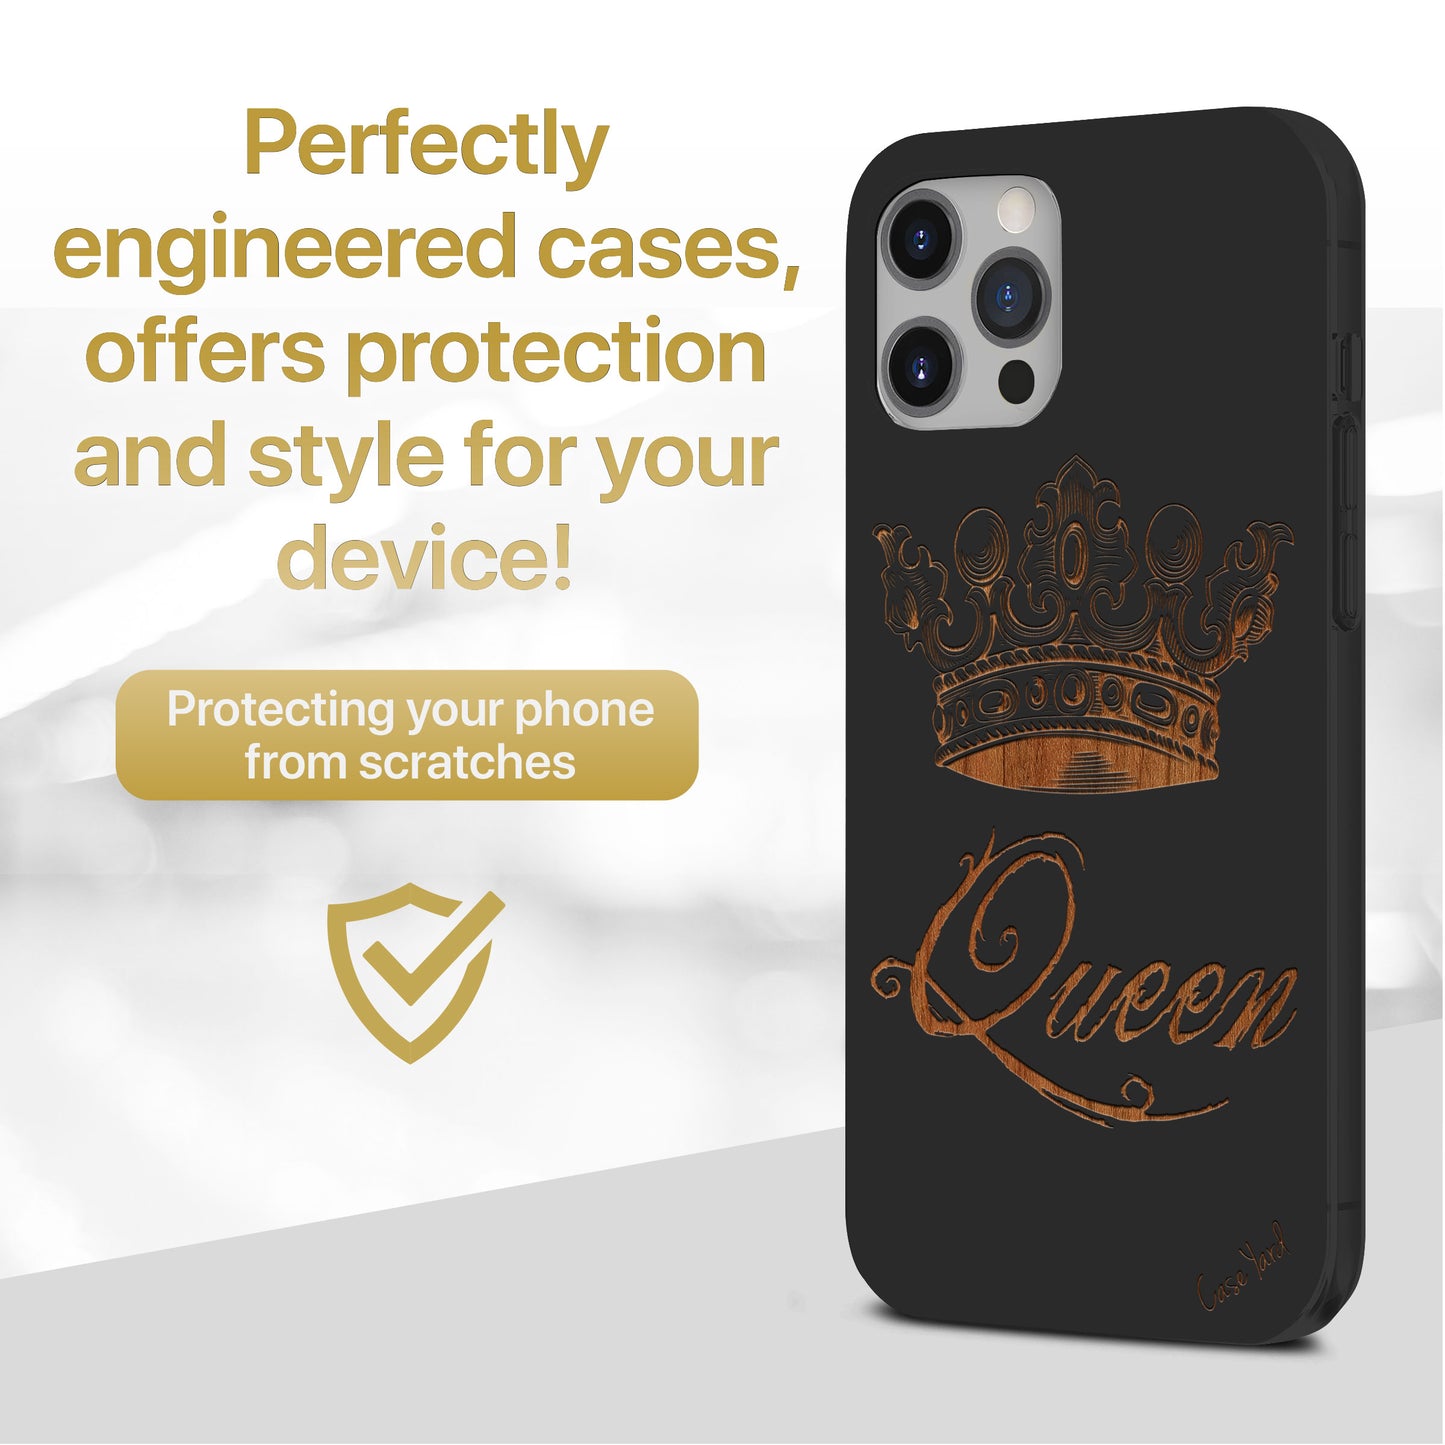 Wooden Cell Phone Case Cover, Laser Engraved case for iPhone & Samsung phone Queen Crown Design